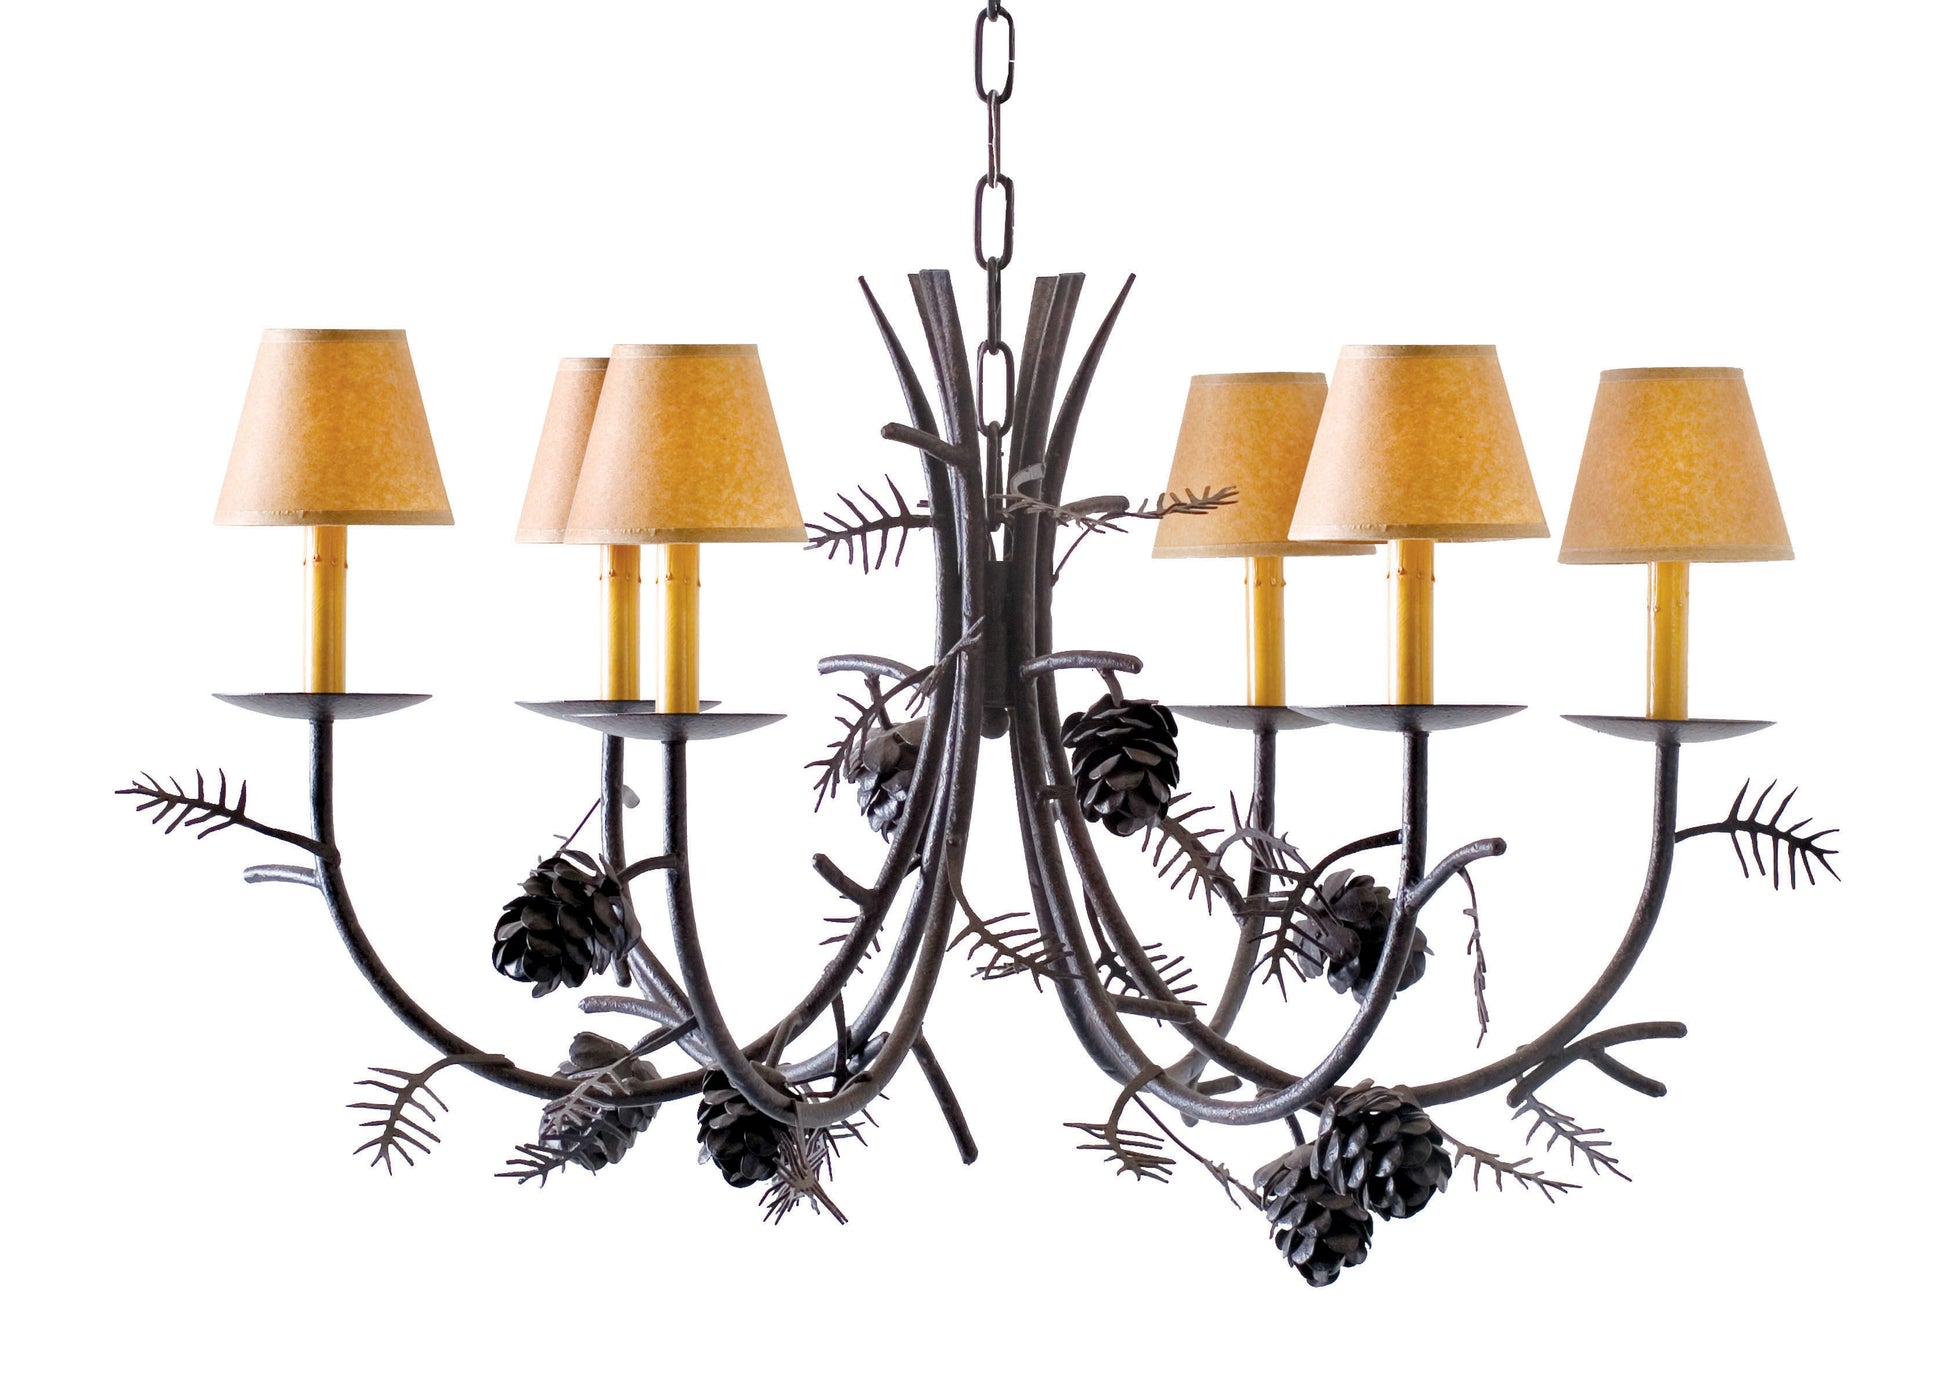 42" Pinecone 6-Light Chandelier by 2nd Ave Lighting